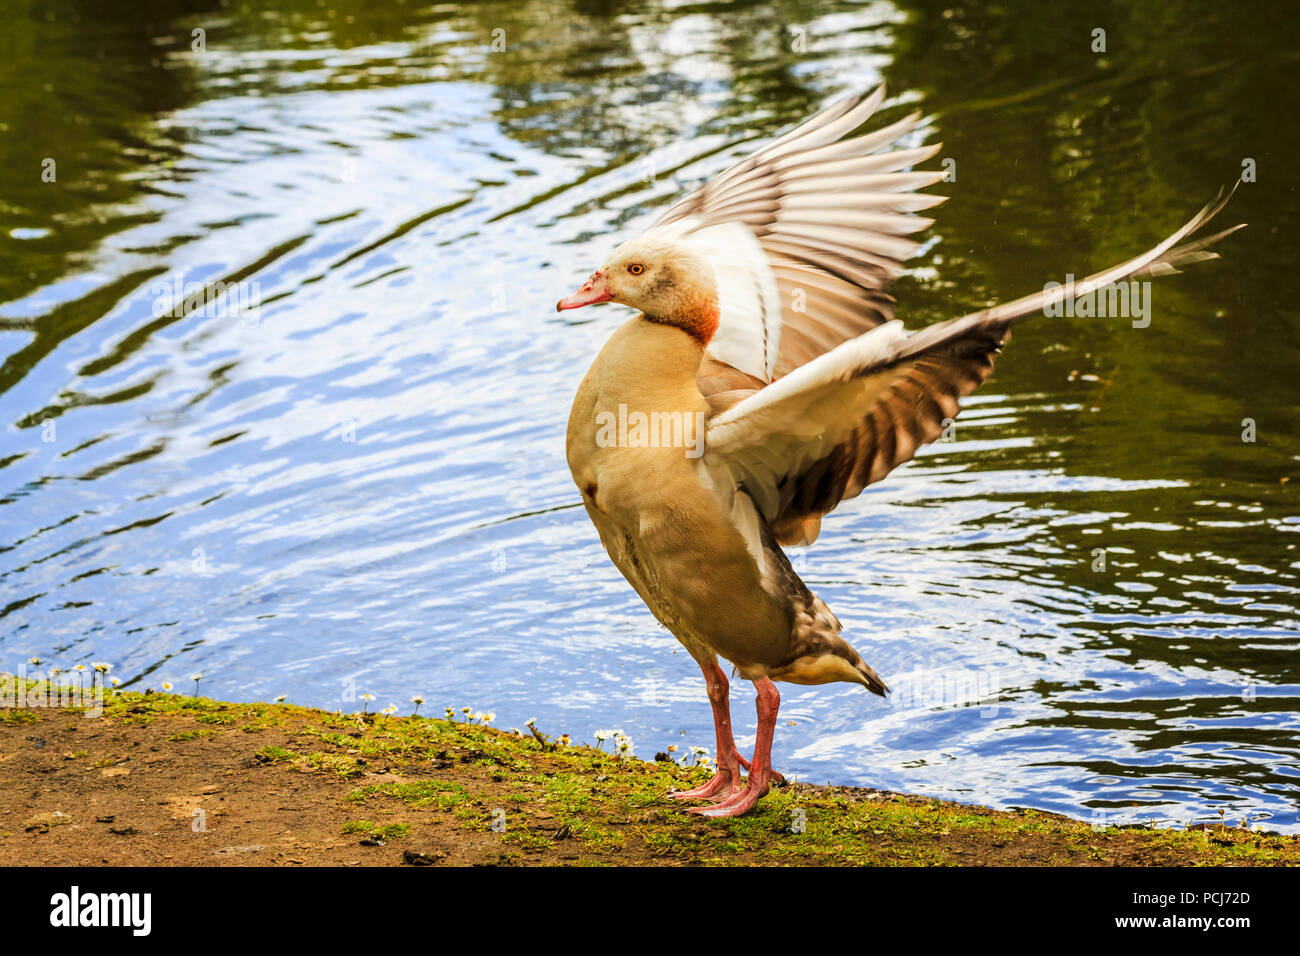 An Egyptian goose, Alopochen aegyptiaca, stands and spreads its wings at the side of a lake in Isabella Plantation, Richmond Park, London, UK Stock Photo